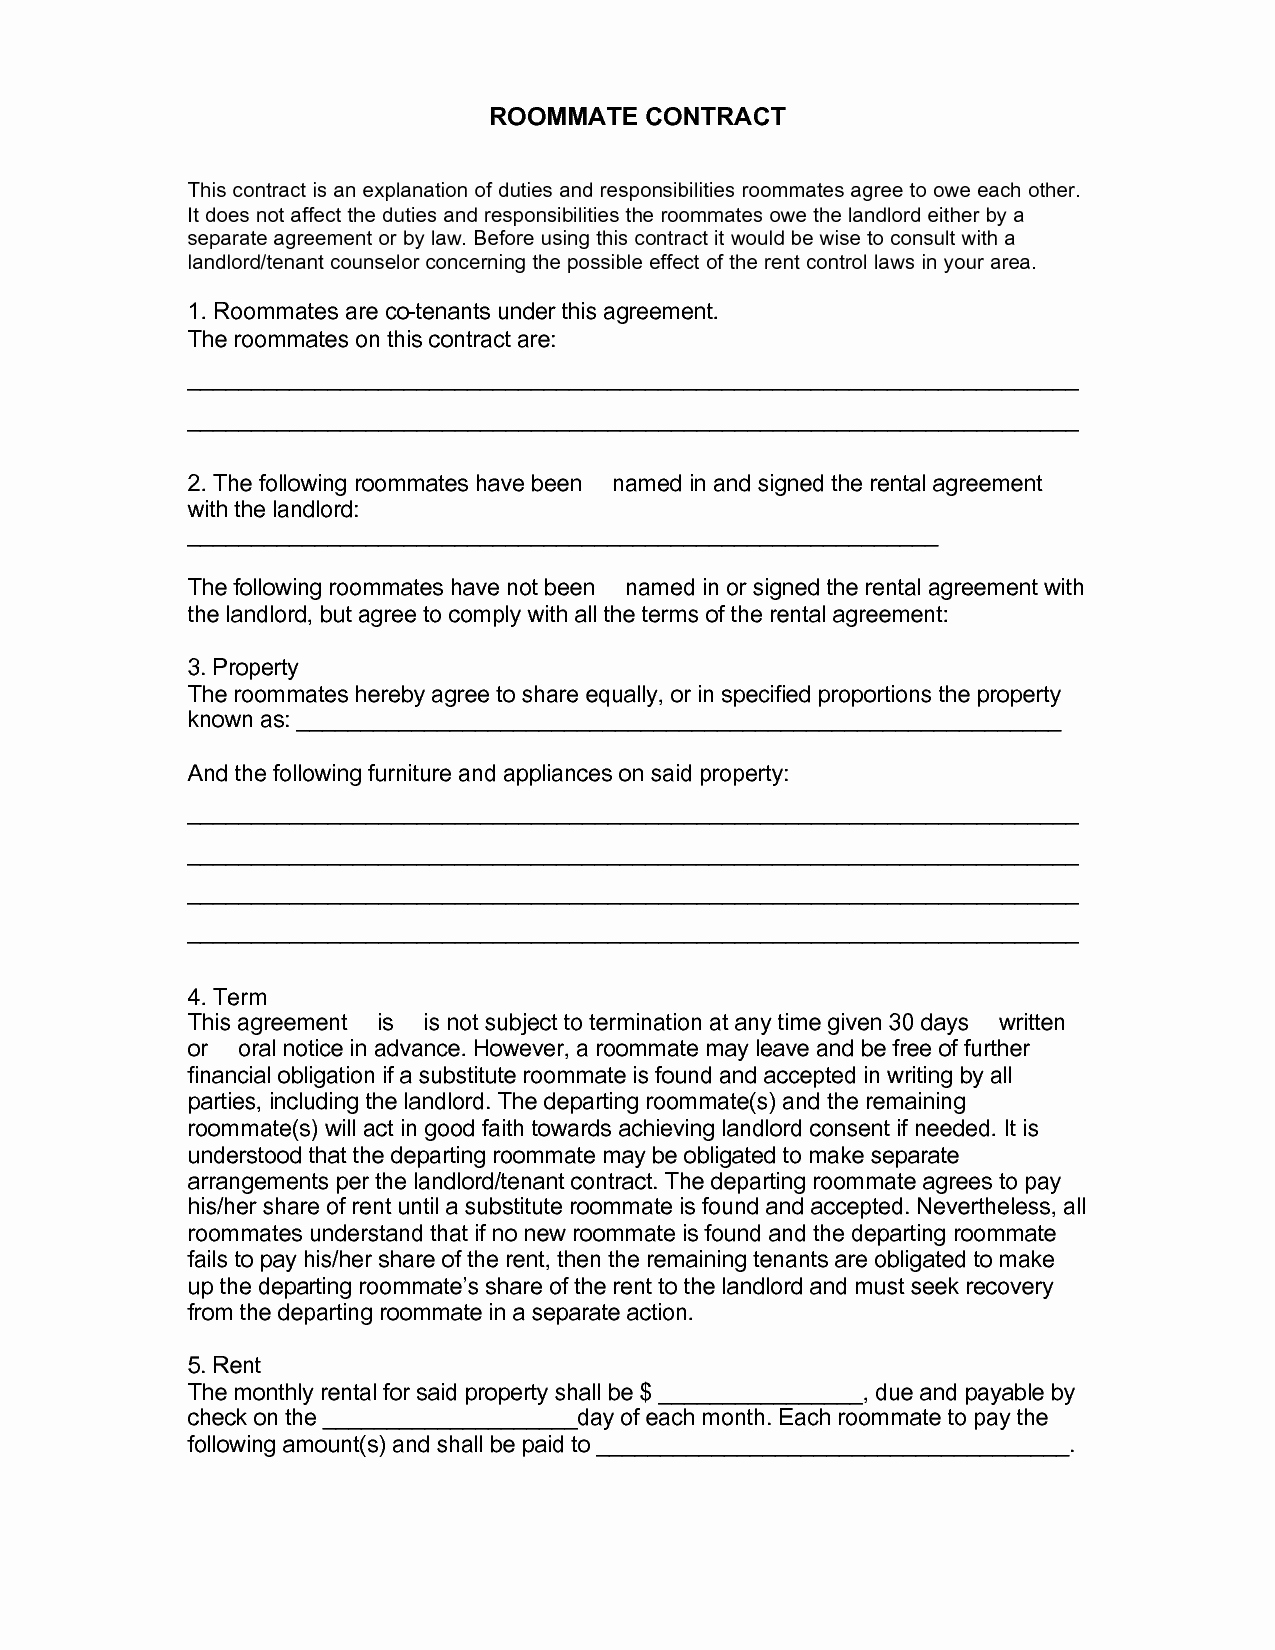 Living Agreement Template Best Of Pin by Denice Huntaro On Real State